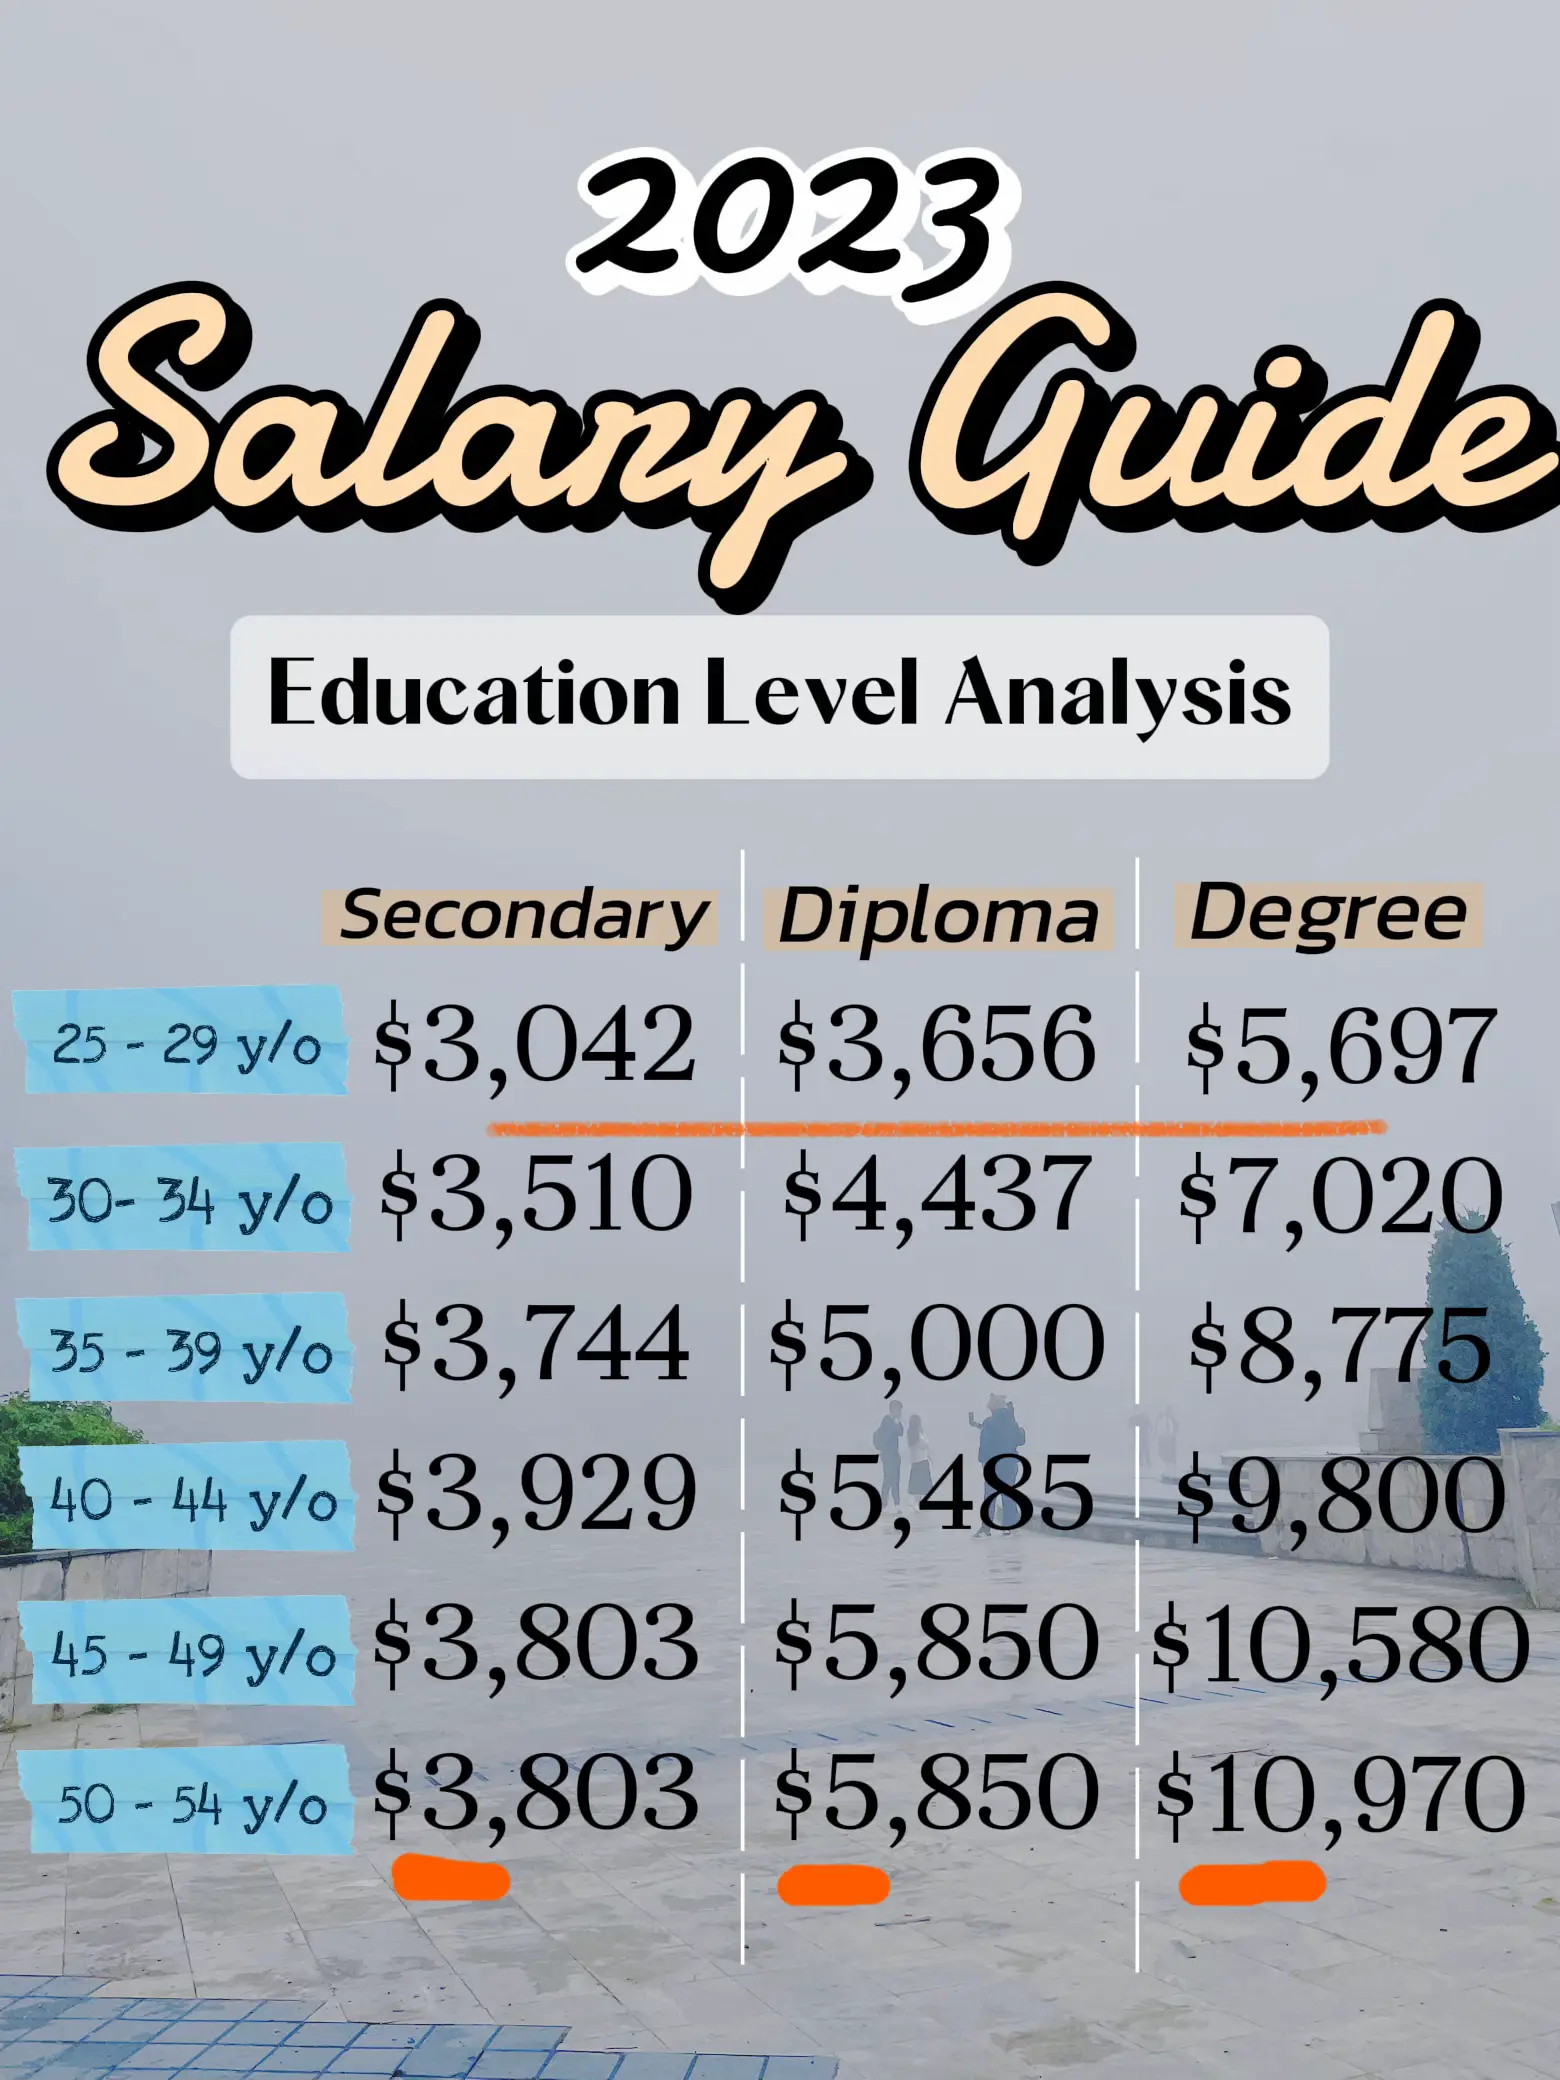 Salary Talk - Is Education Important?'s images(0)